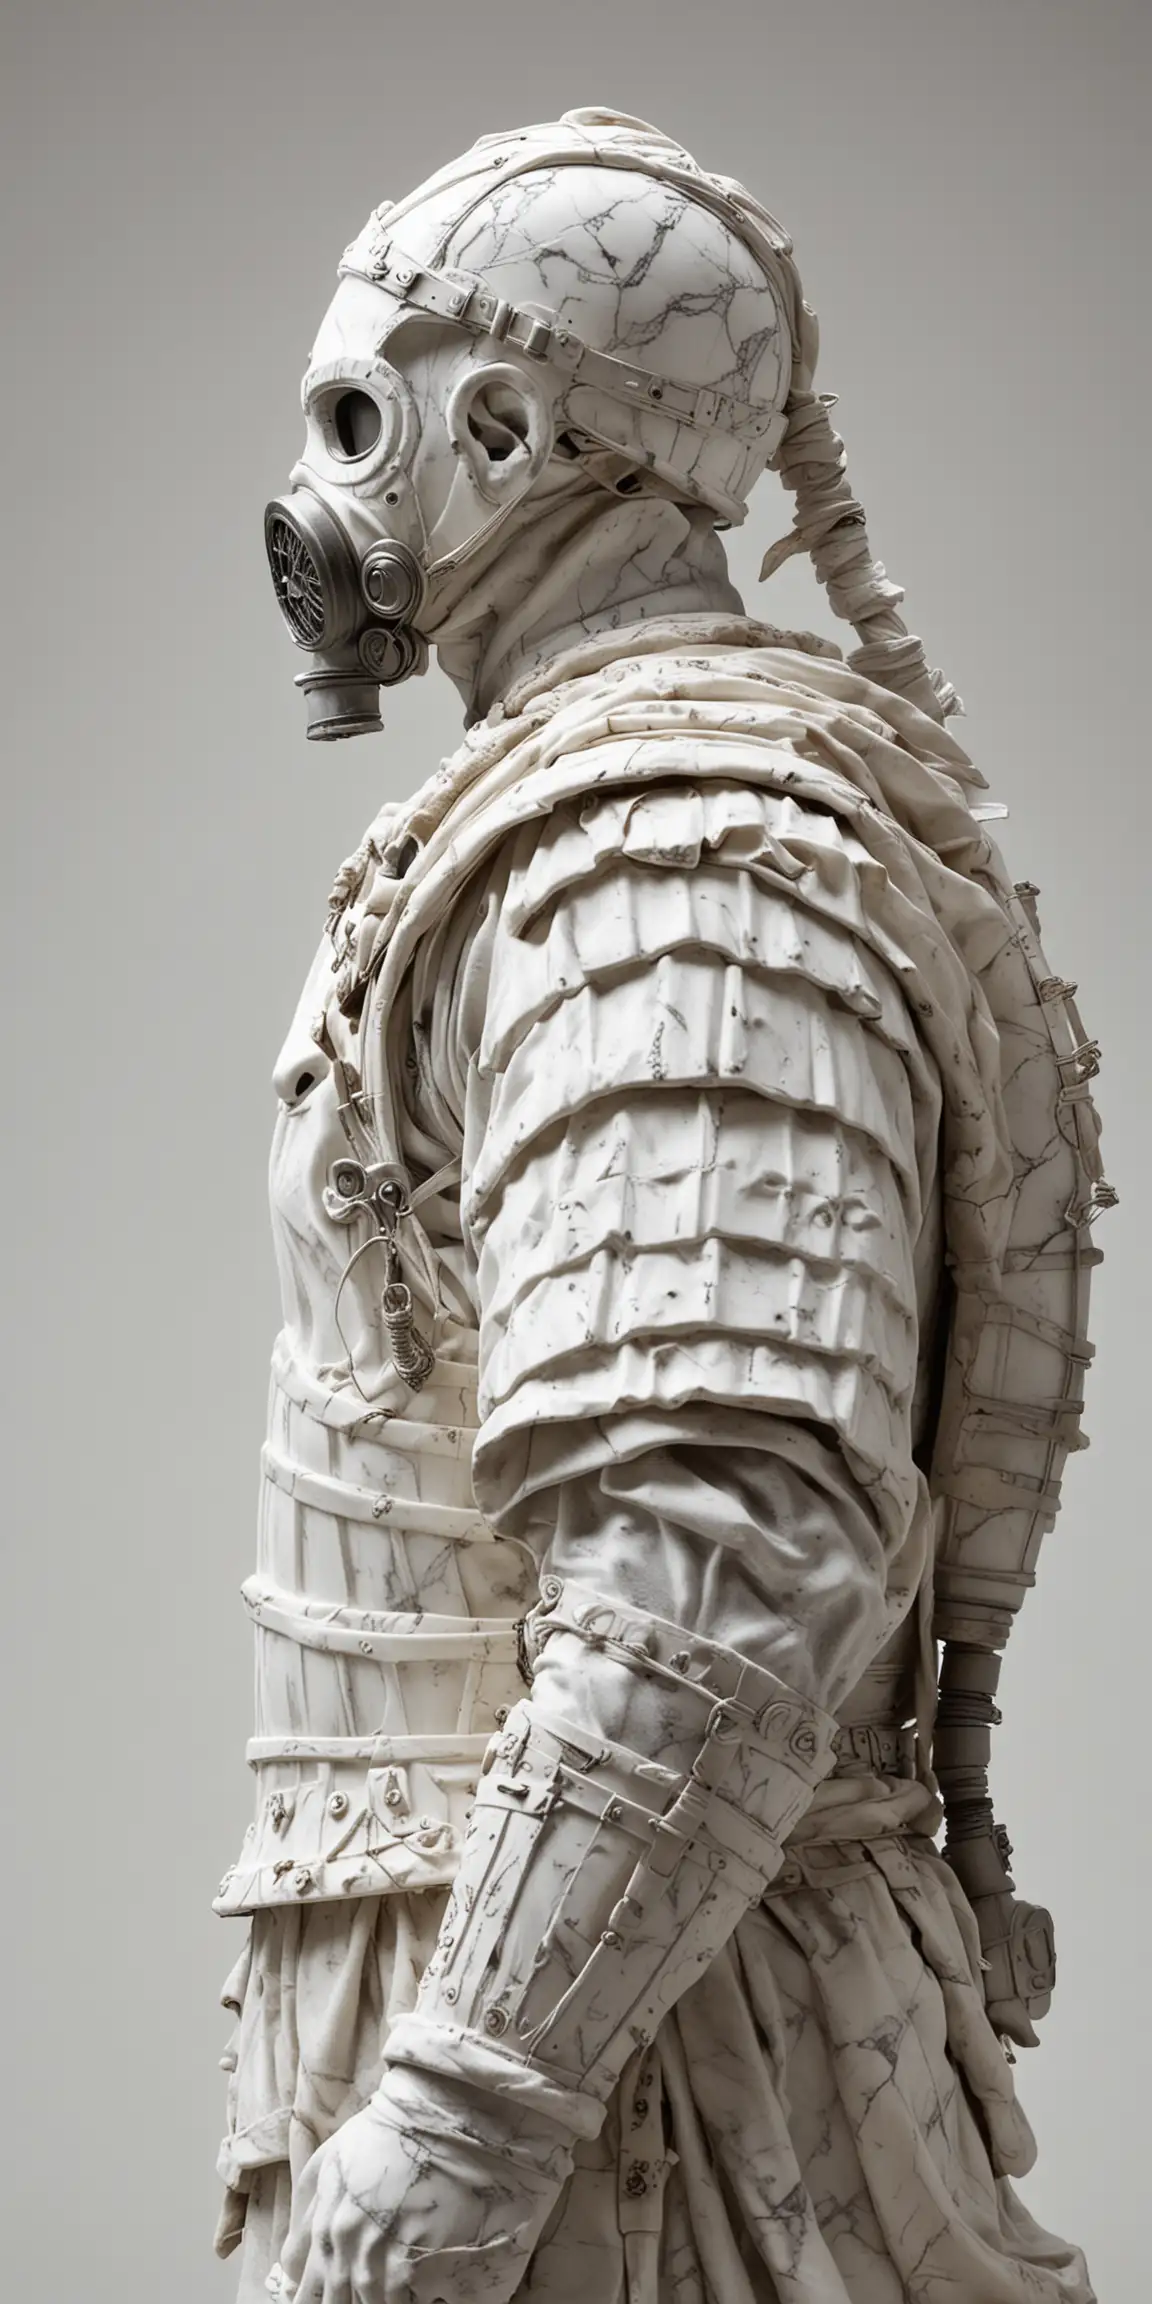 create a white marble statue of a  warrior, we see his profile, he is wearing a gas mask, the light comes from above, the background is plain white